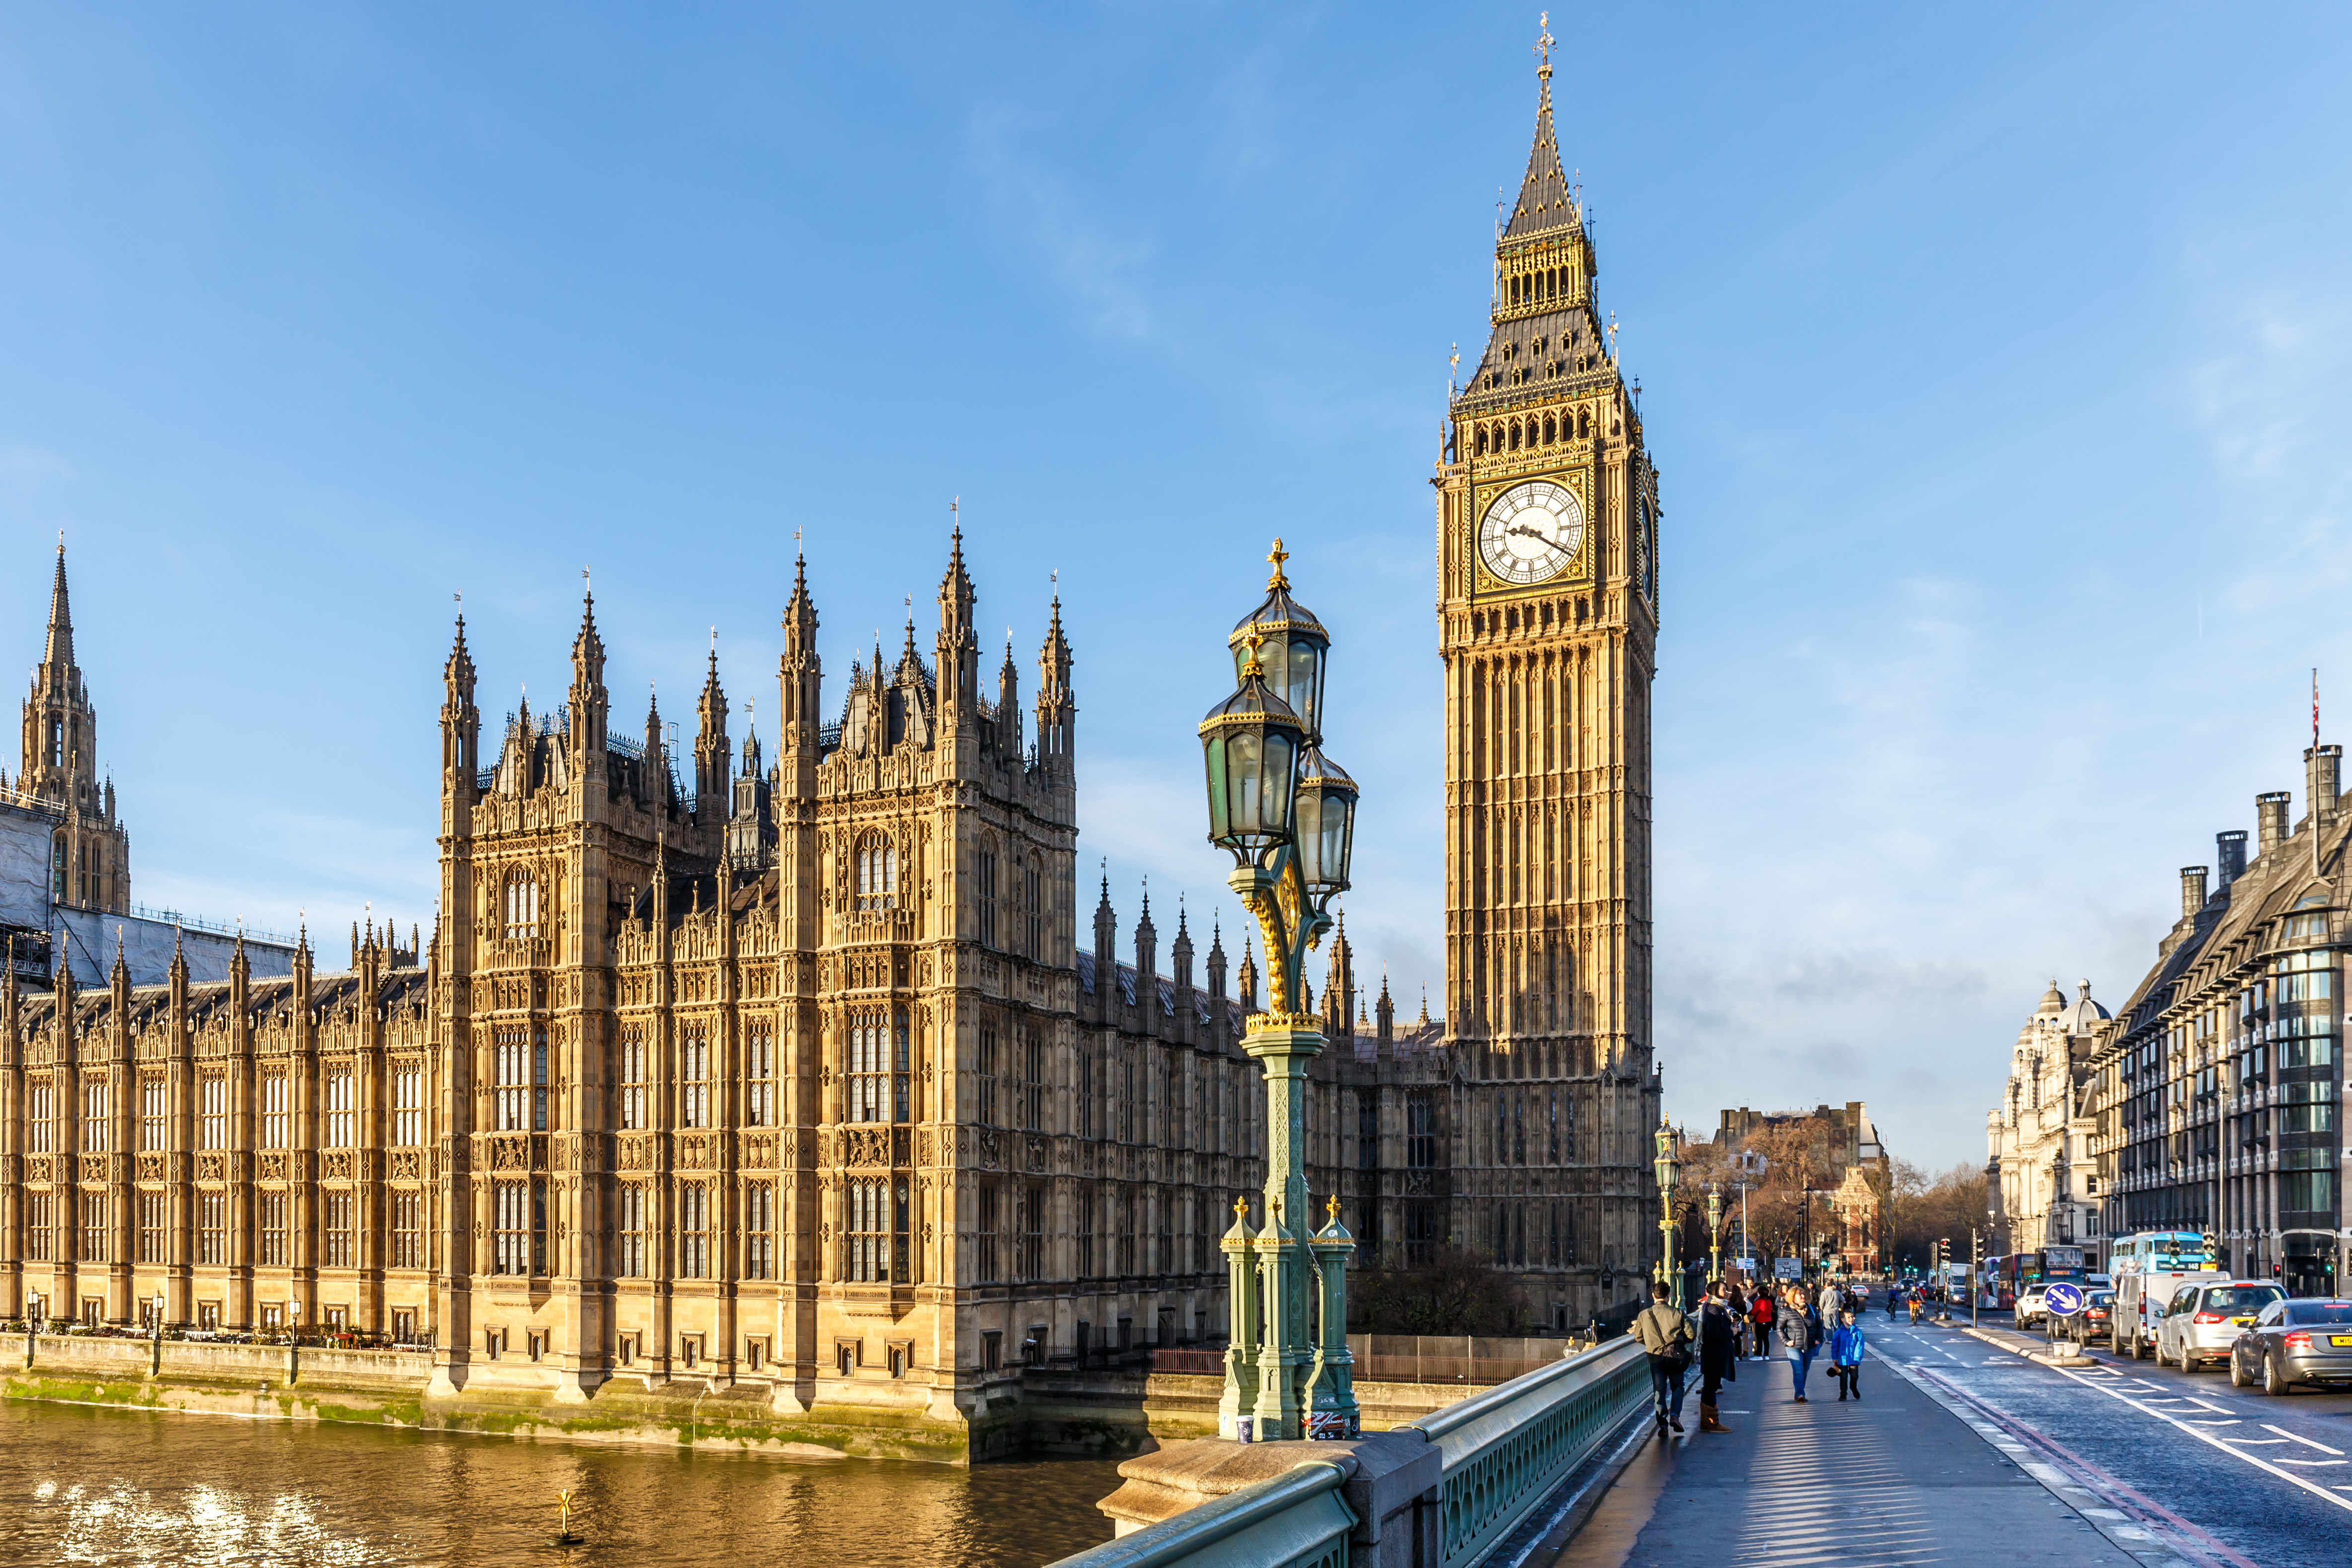 Hear the final chimes of Big Ben in London this week before it falls ...